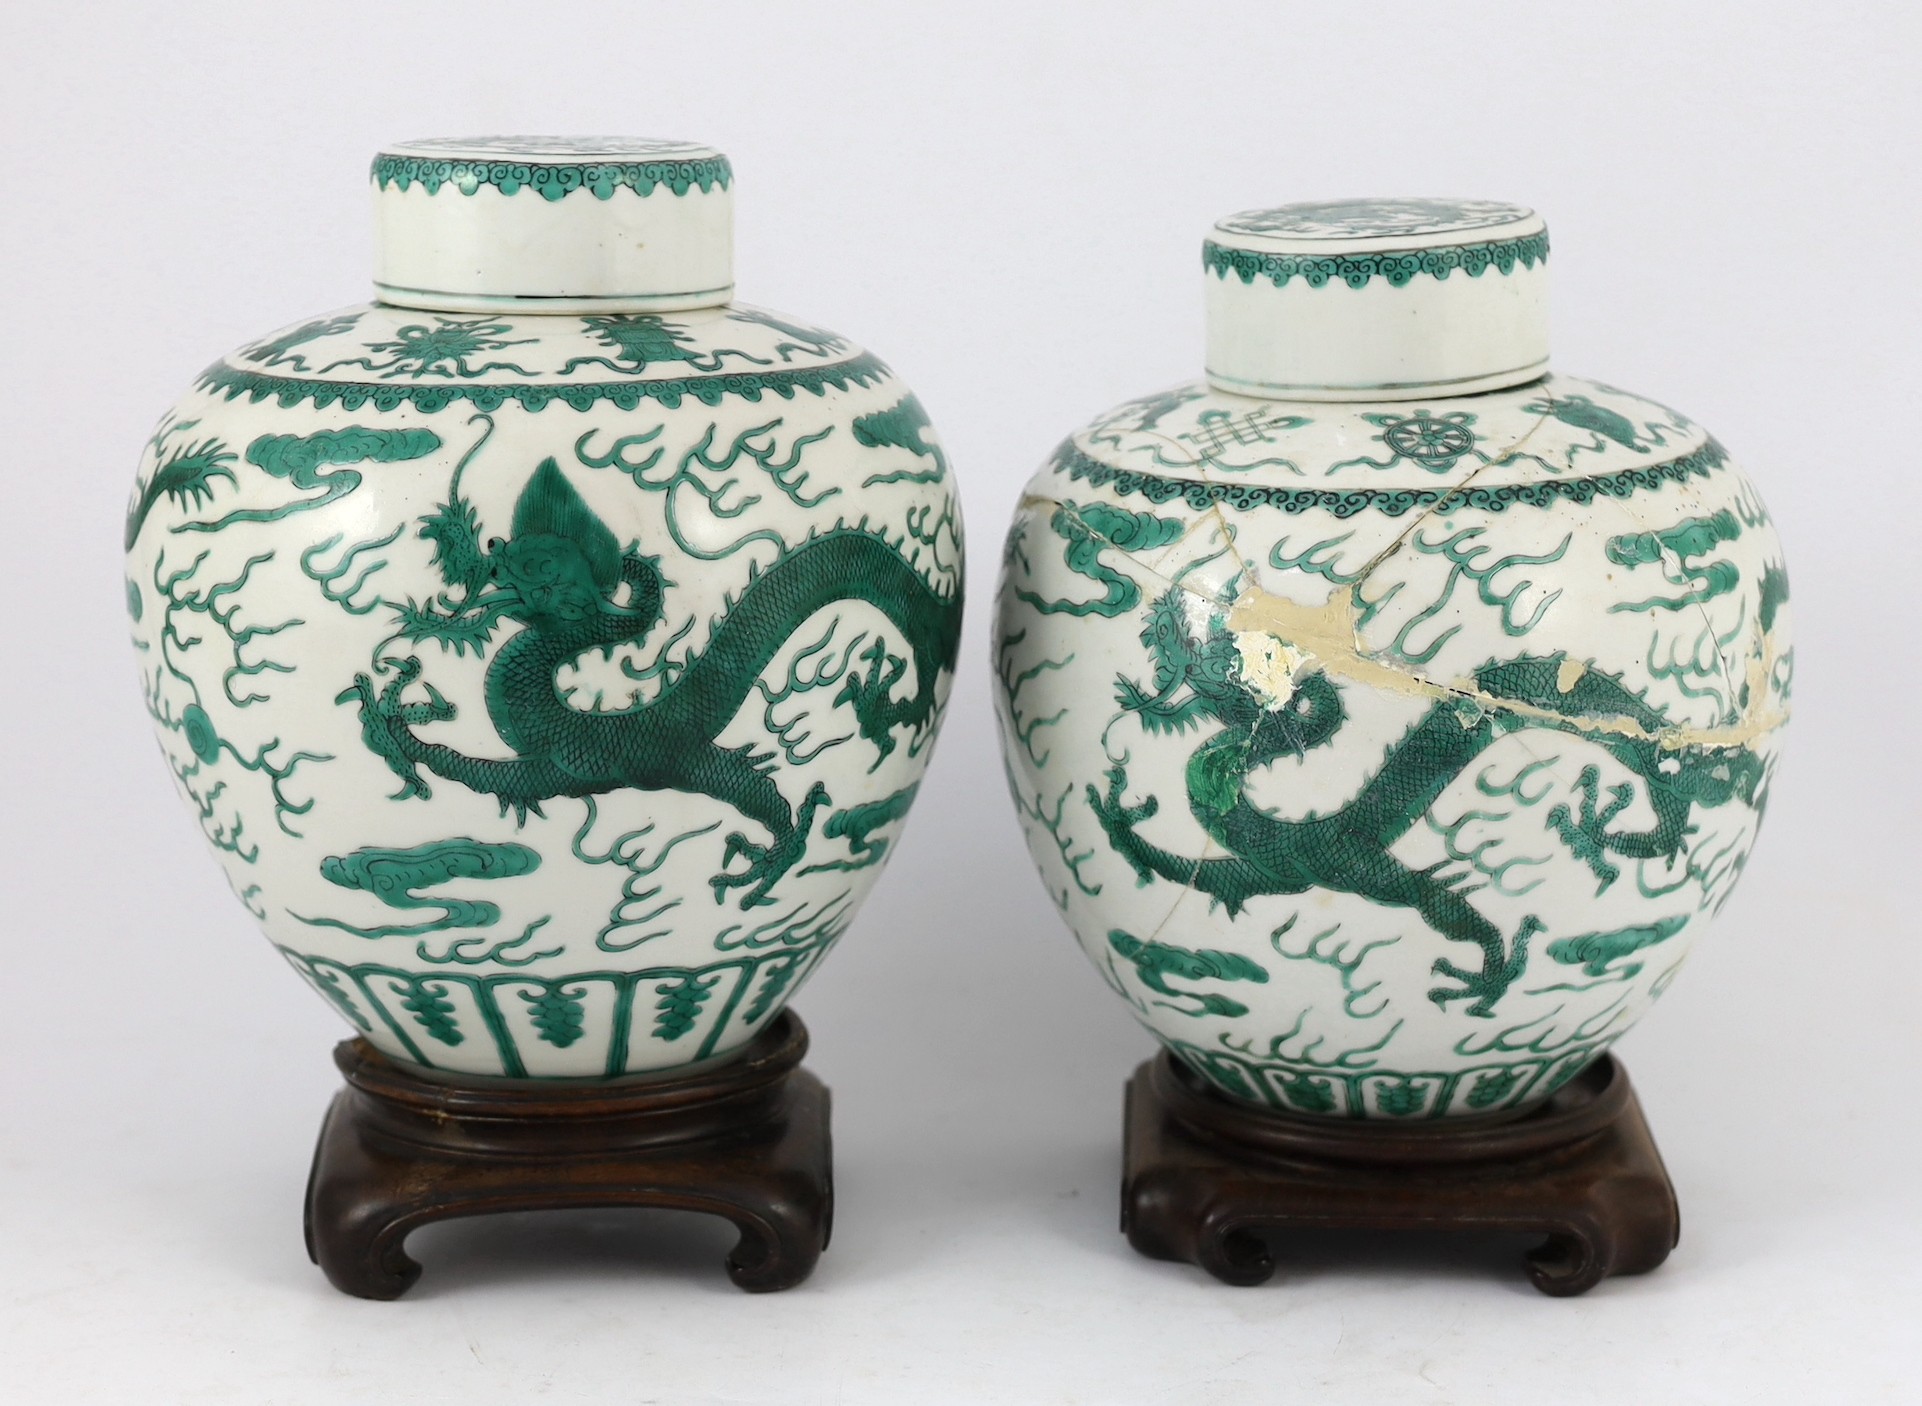 Two similar Chinese green enamelled ‘dragon’ jars and covers, Daoguang mark and period (1821-50), 21.5cm high, damaged and repaired